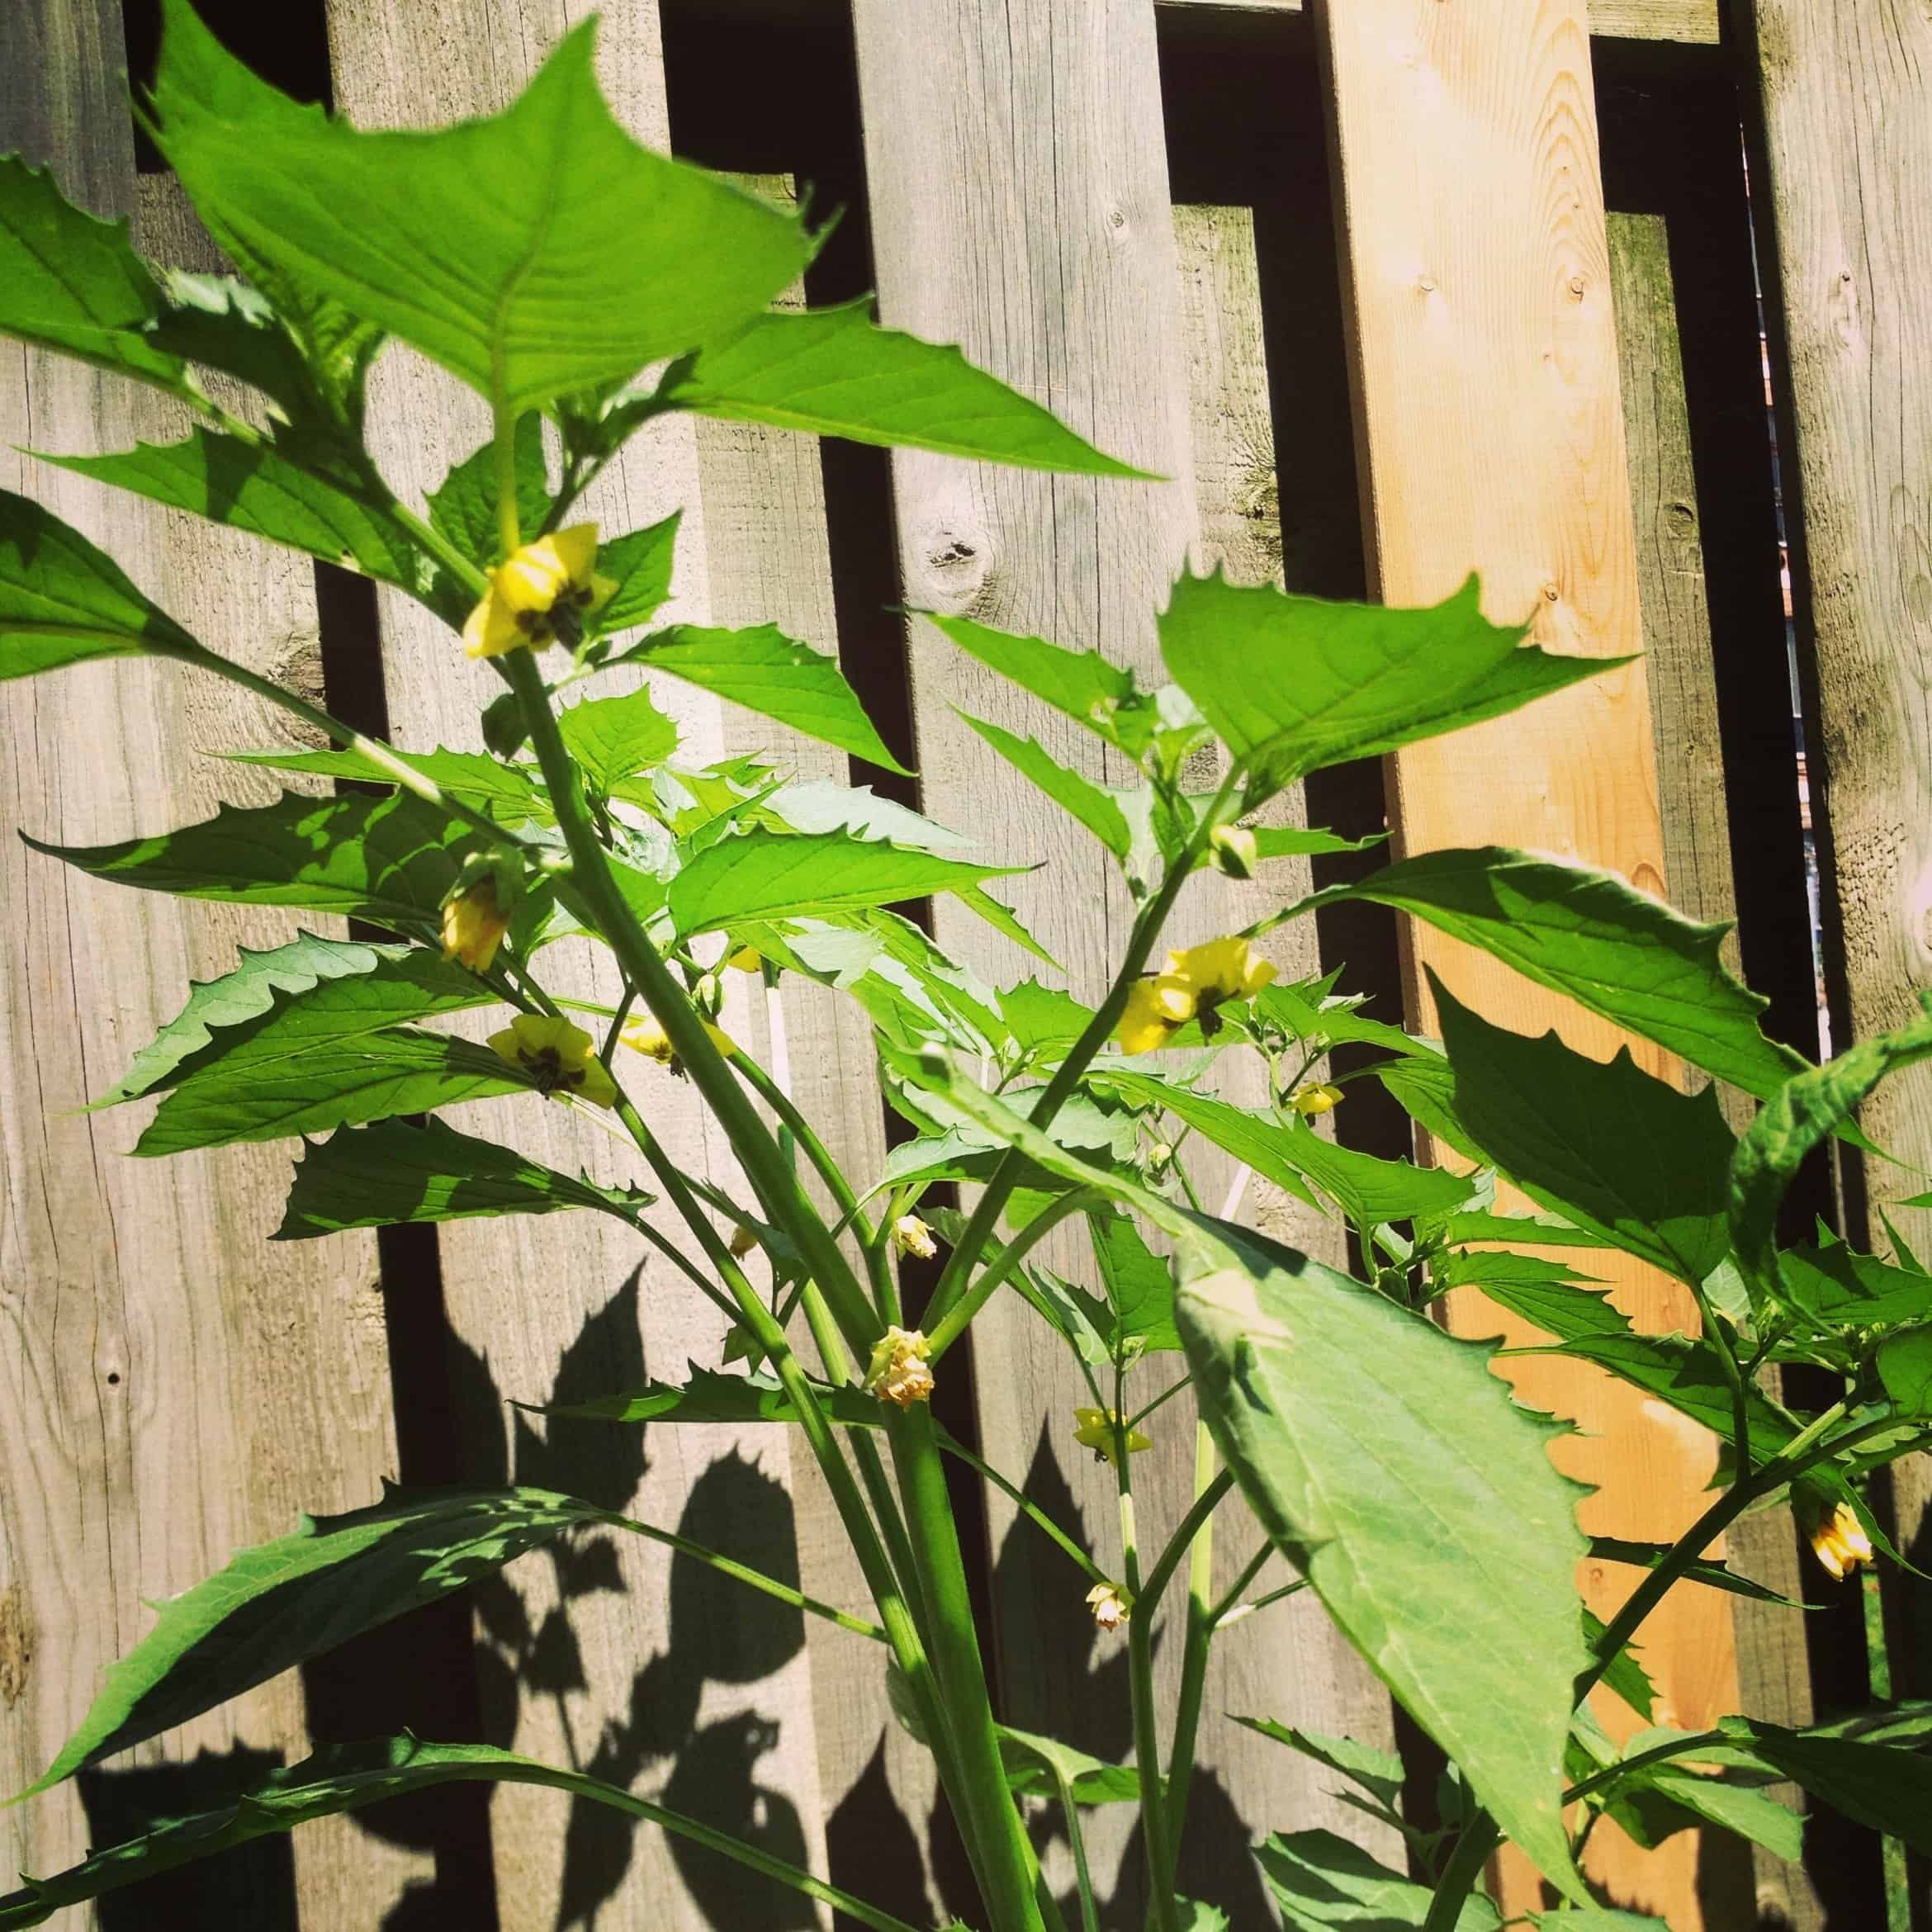 Despite being planted next to the unruly tomatoes, my tomatillo plant is tall and healthy, with lots of blooms.